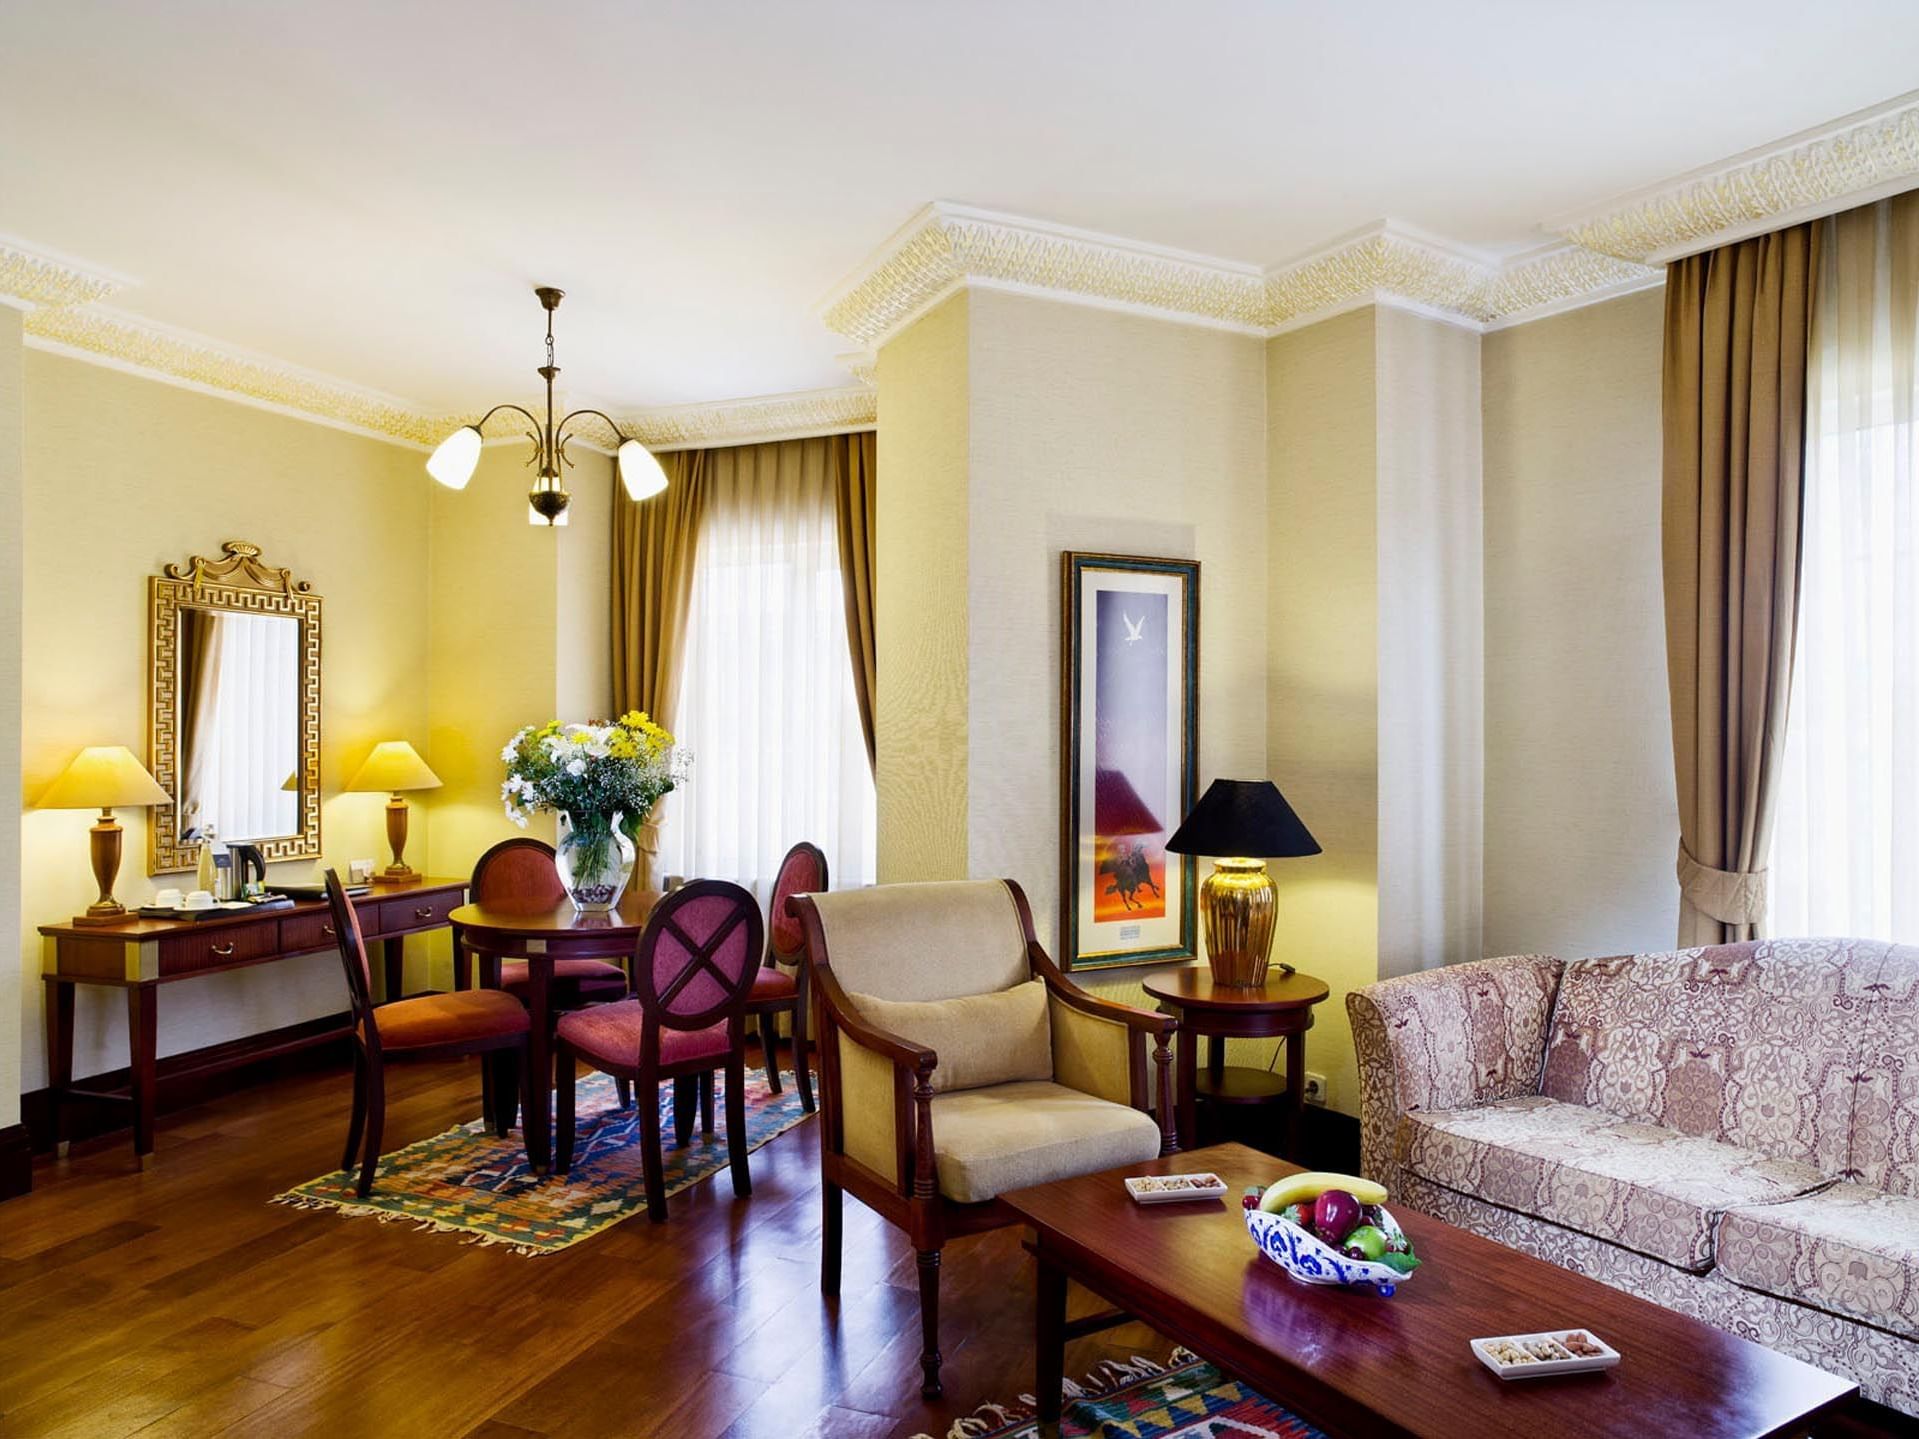 Luxurious Sultanahmet Escape: Eresin Junior Suite. King bed, spa bath, separate living area, Blue Mosque nearby.